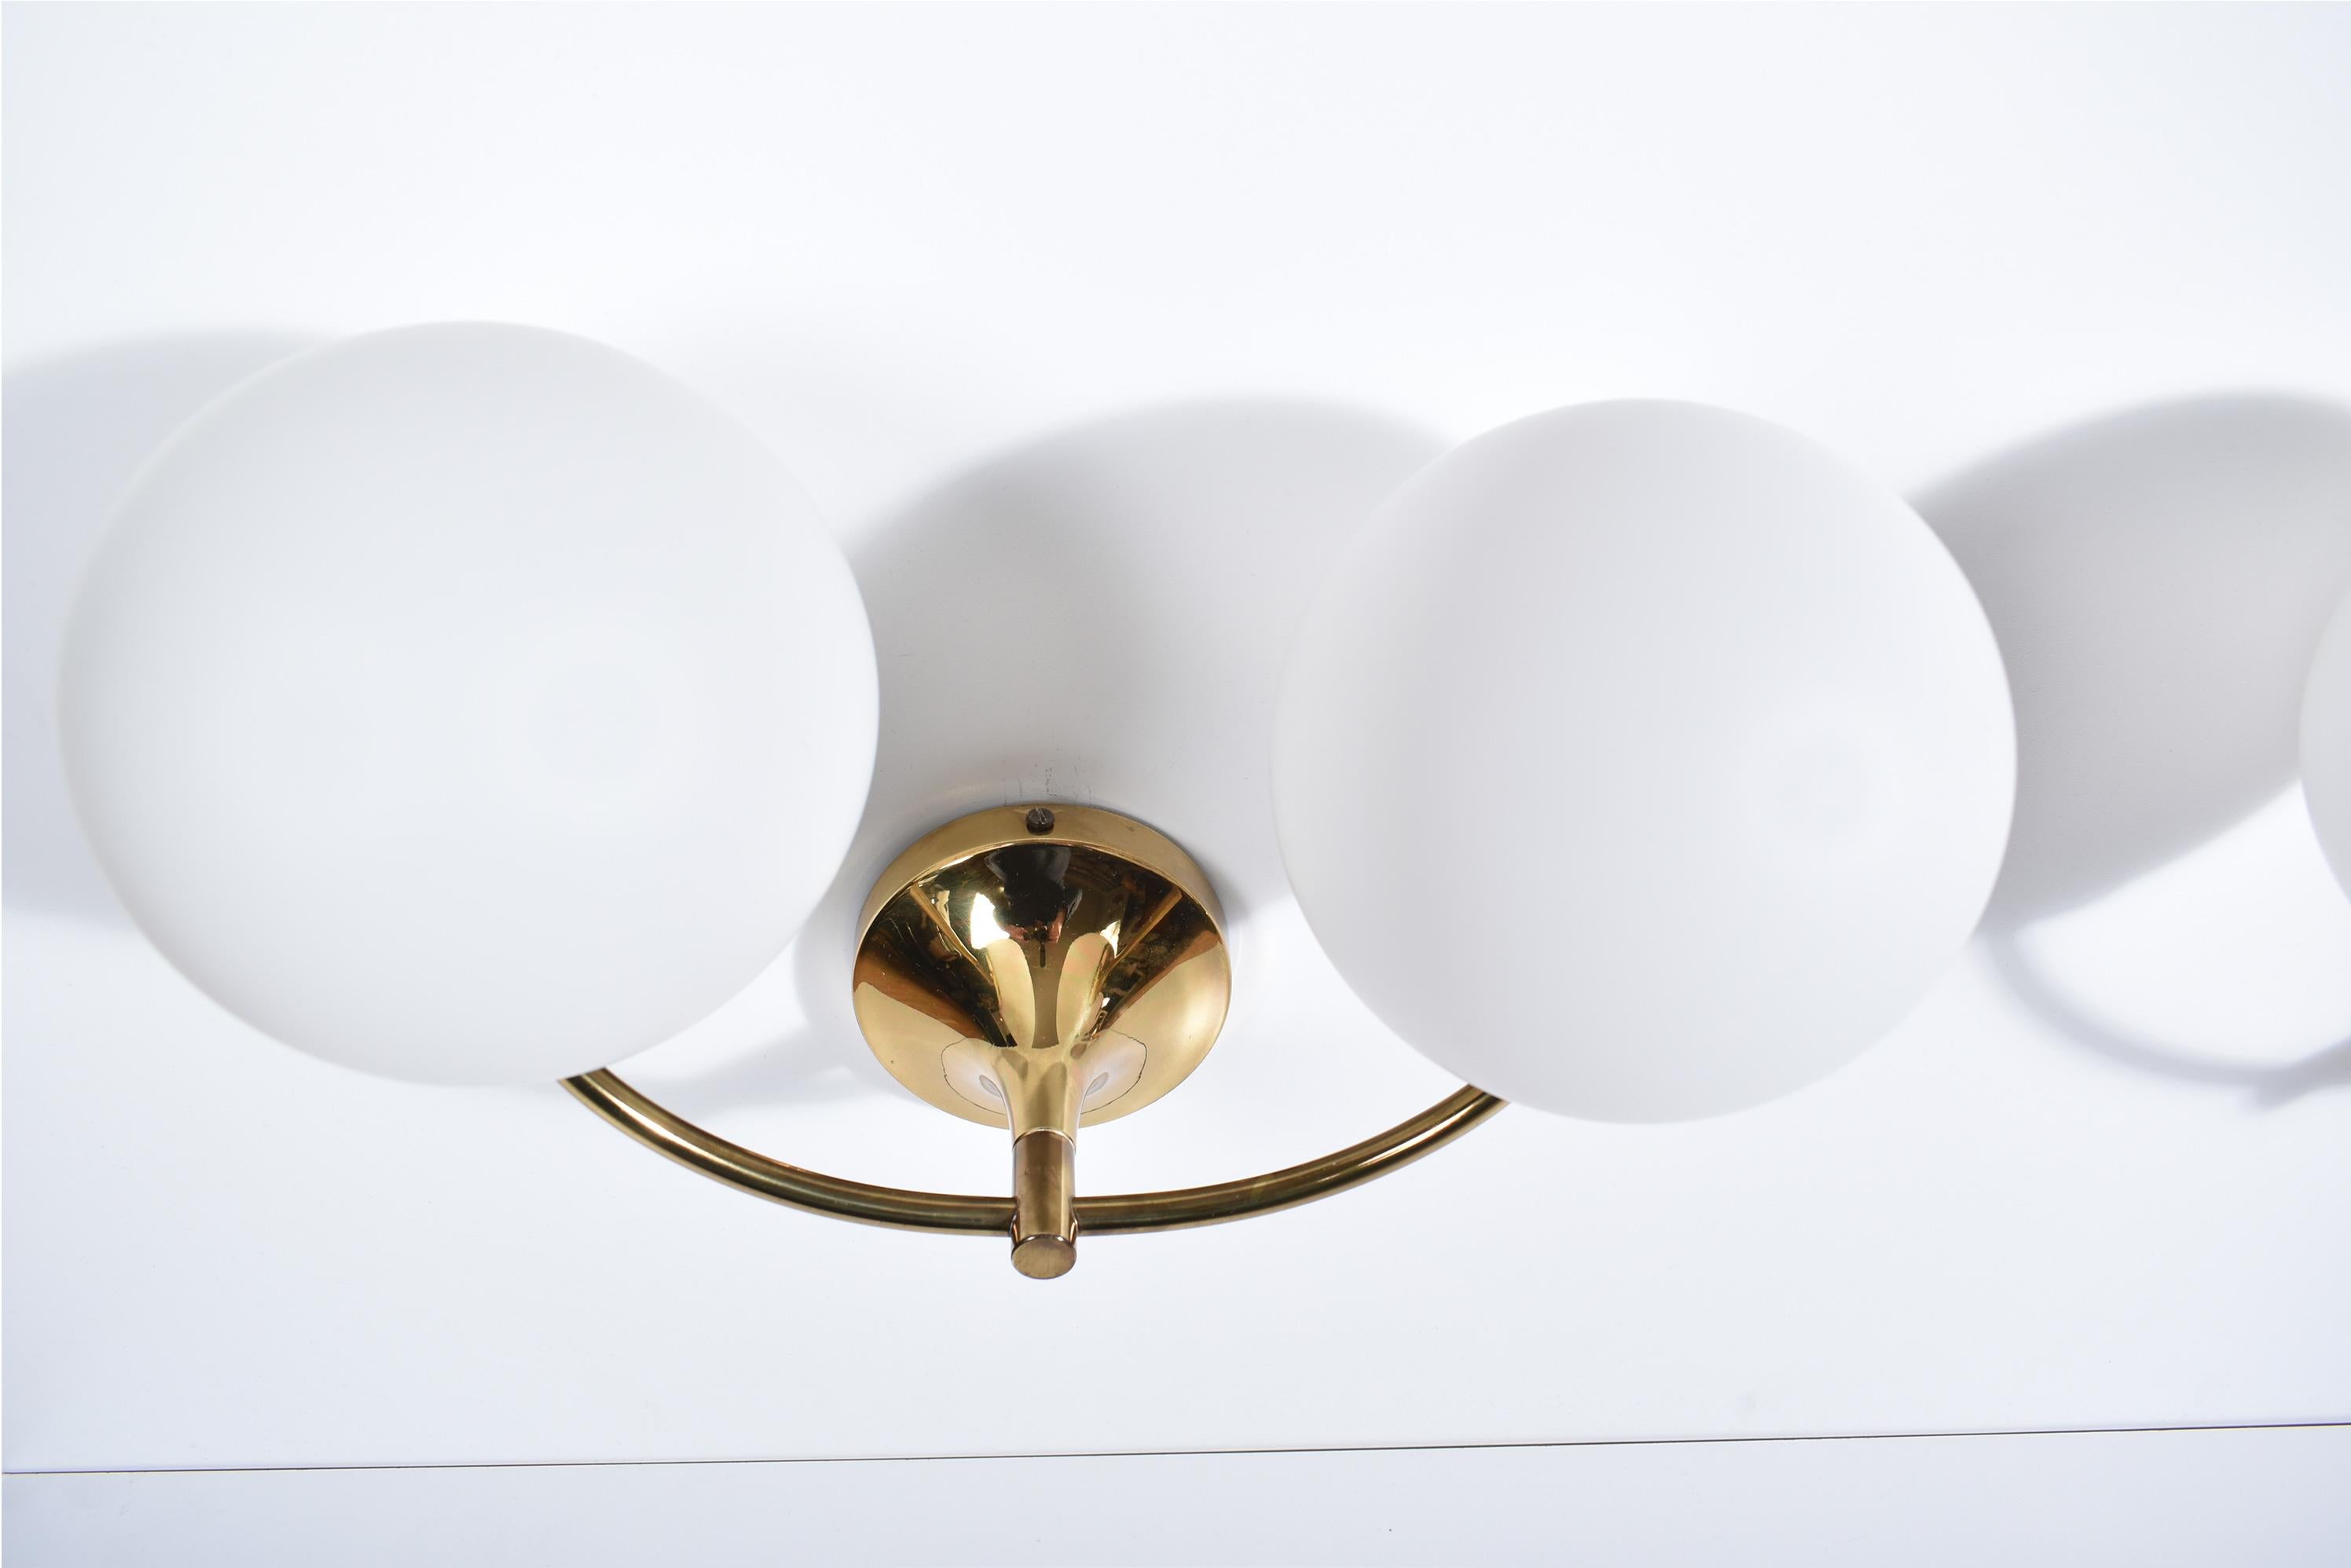 Polished Brass Wall lights With Globes, Max Bill / E.R. Nele for Temde, Set of Four, 1960